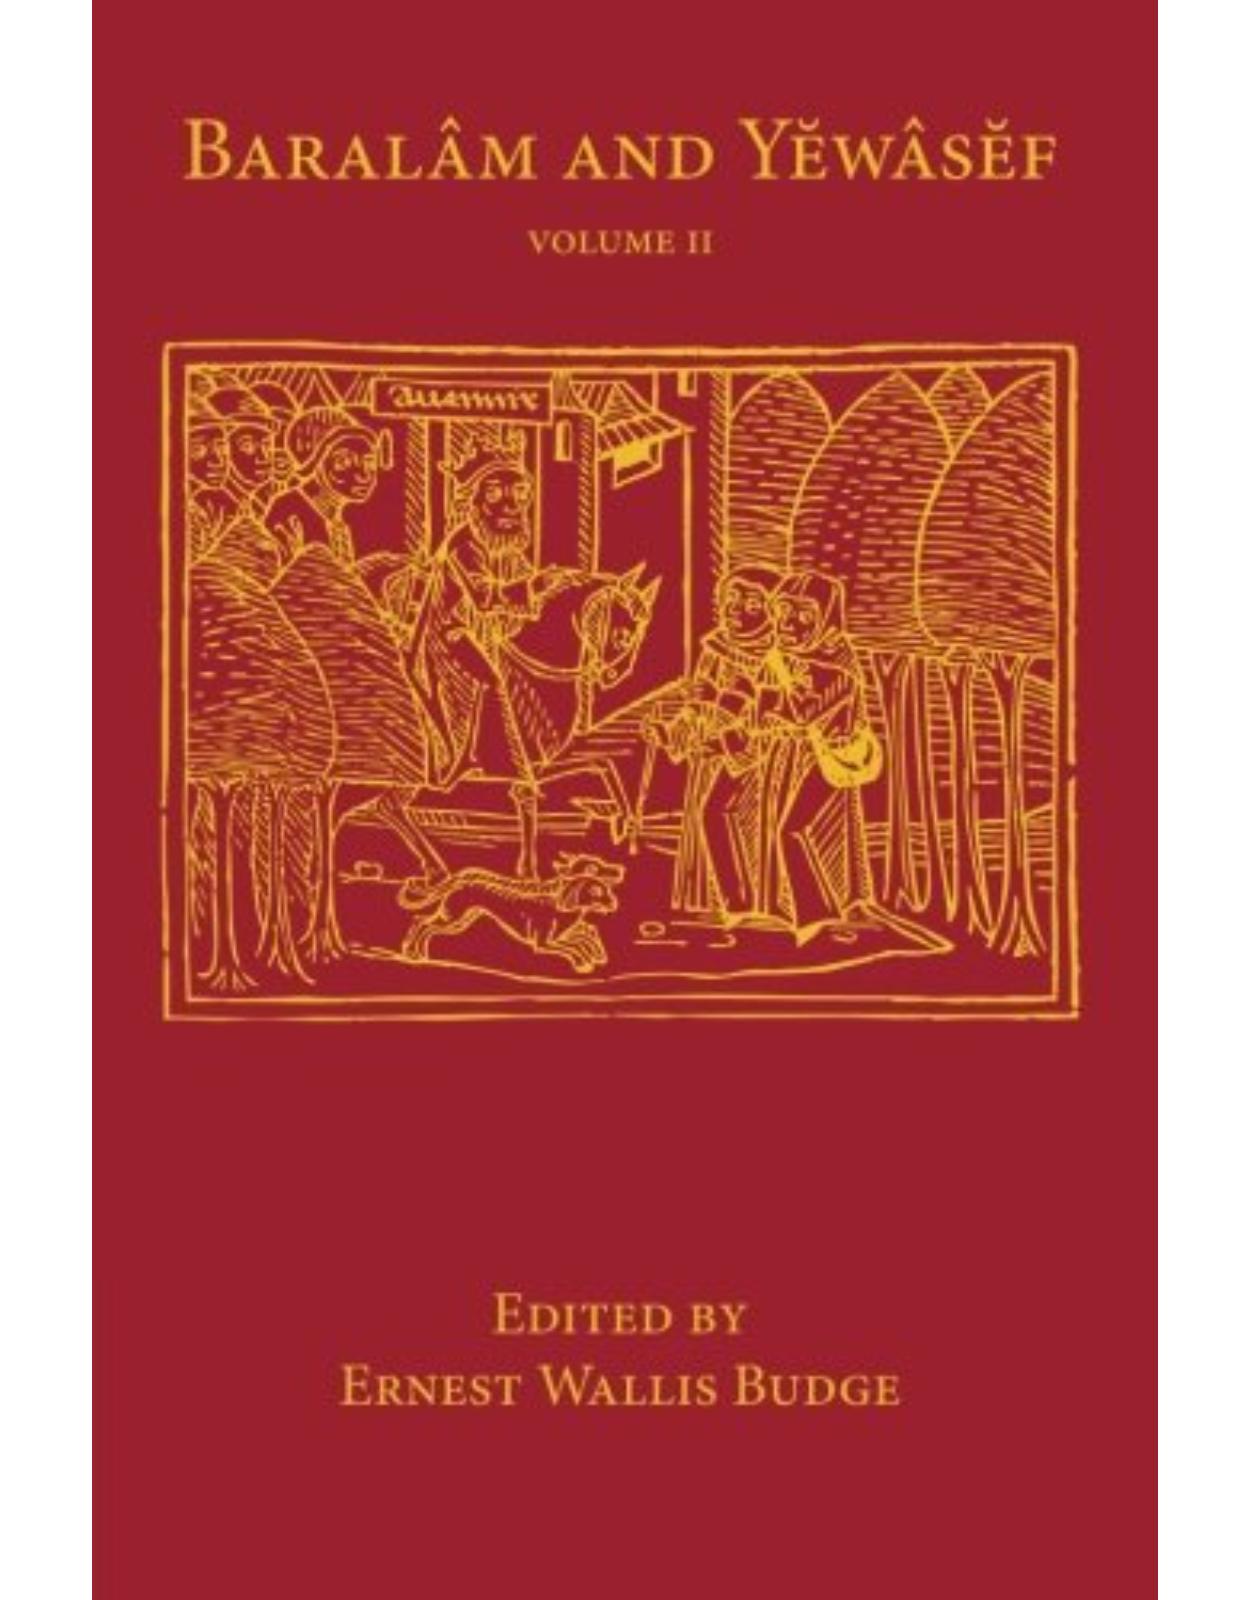 Baralam and Yewasef: Volume 2: Being the Ethiopic Version of a Christianized Recension of the Buddhist Legend of the Buddha and the Bodhisattva (Library of Arcana)